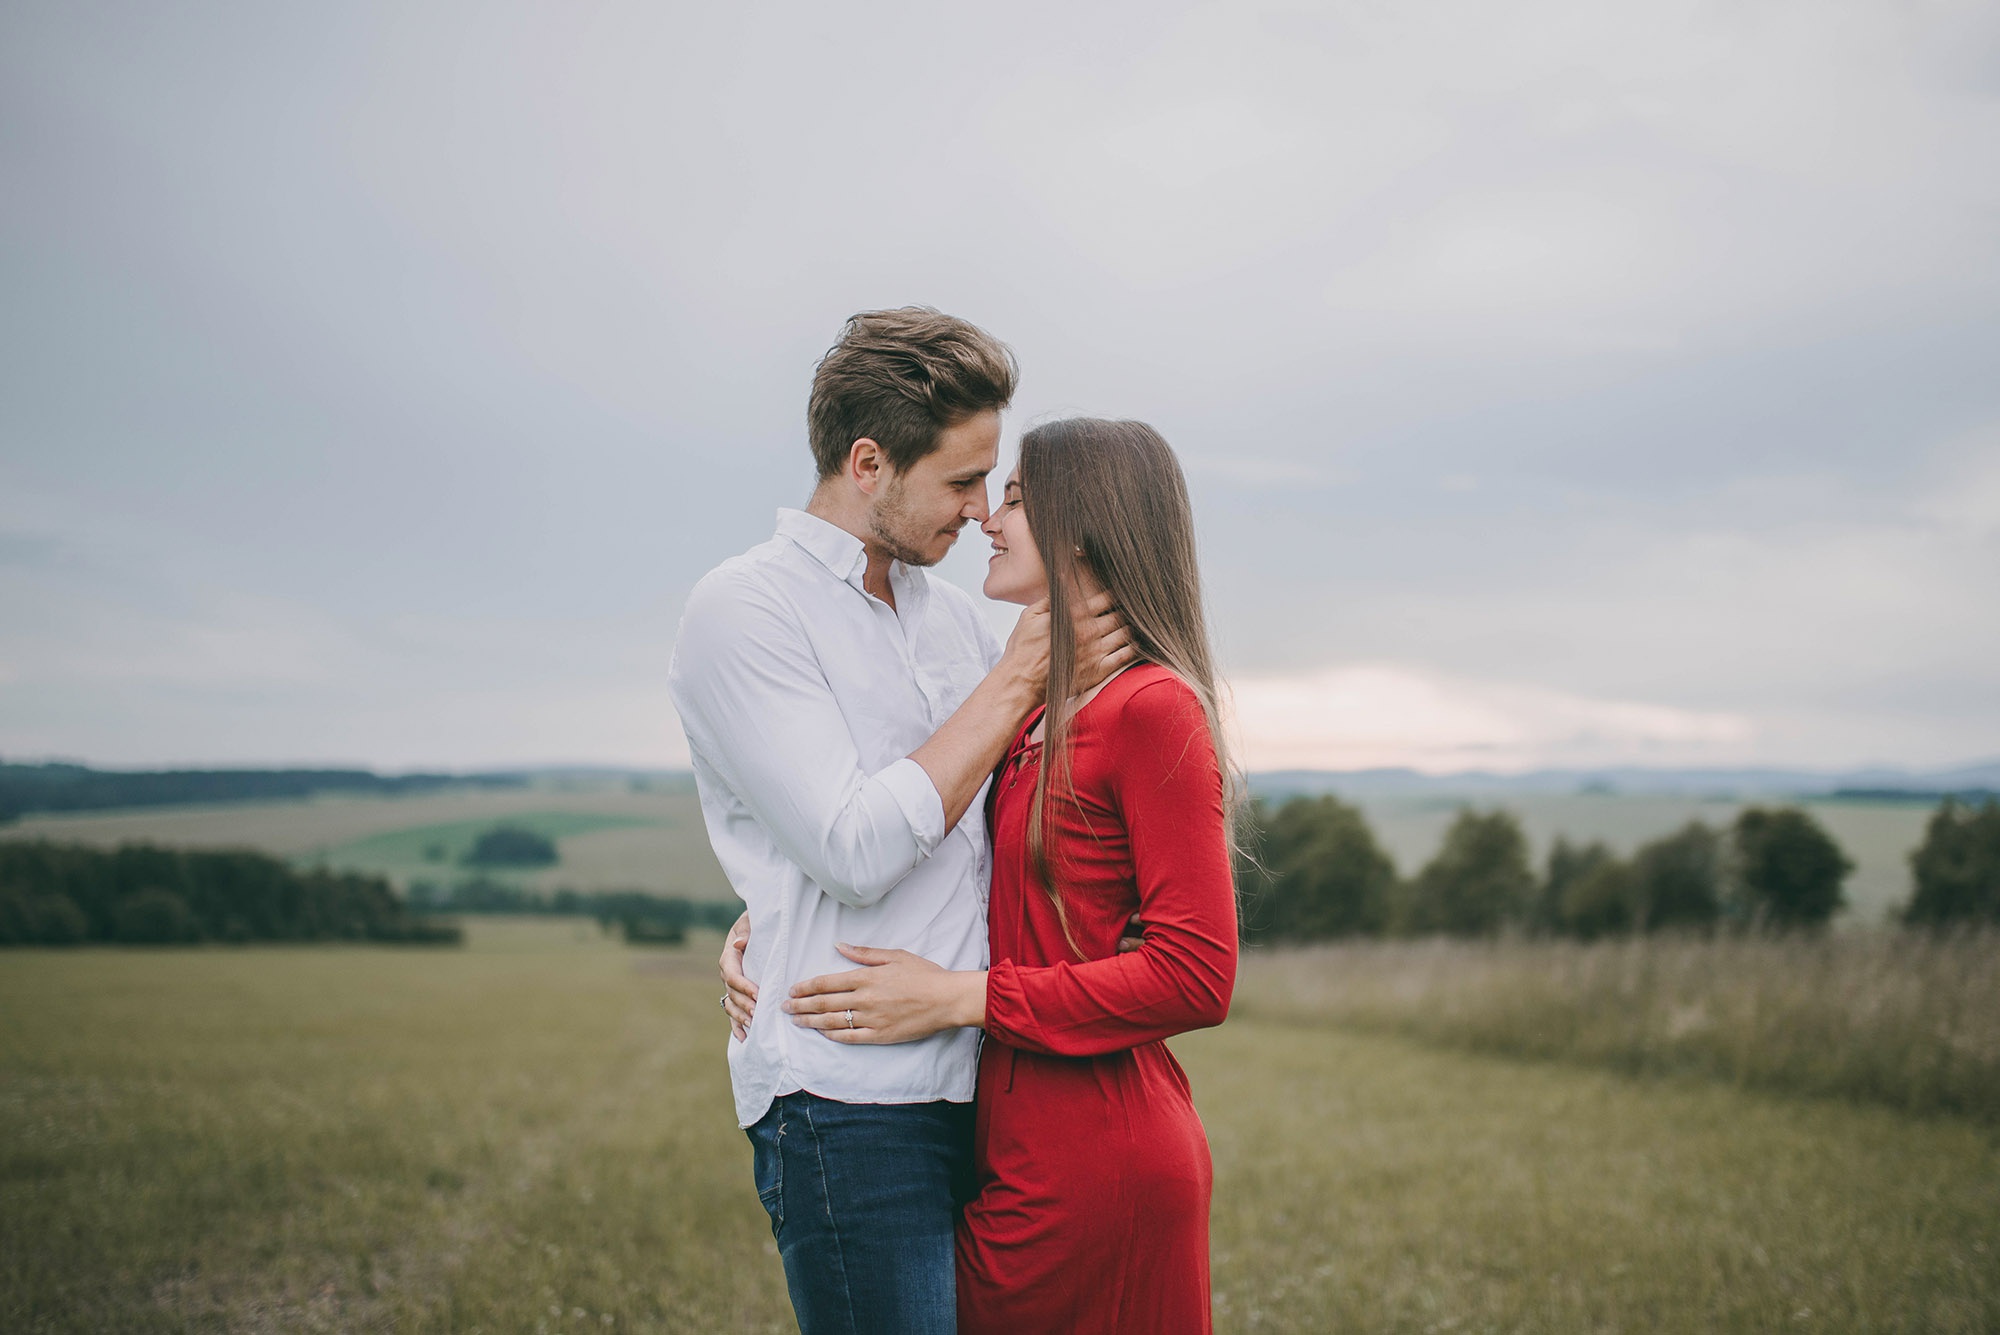 Jiri Tulach Cuddle Red Dress Brunette Field Hugging Hands On Waist Face To Face Jeans White Shirt 2000x1335